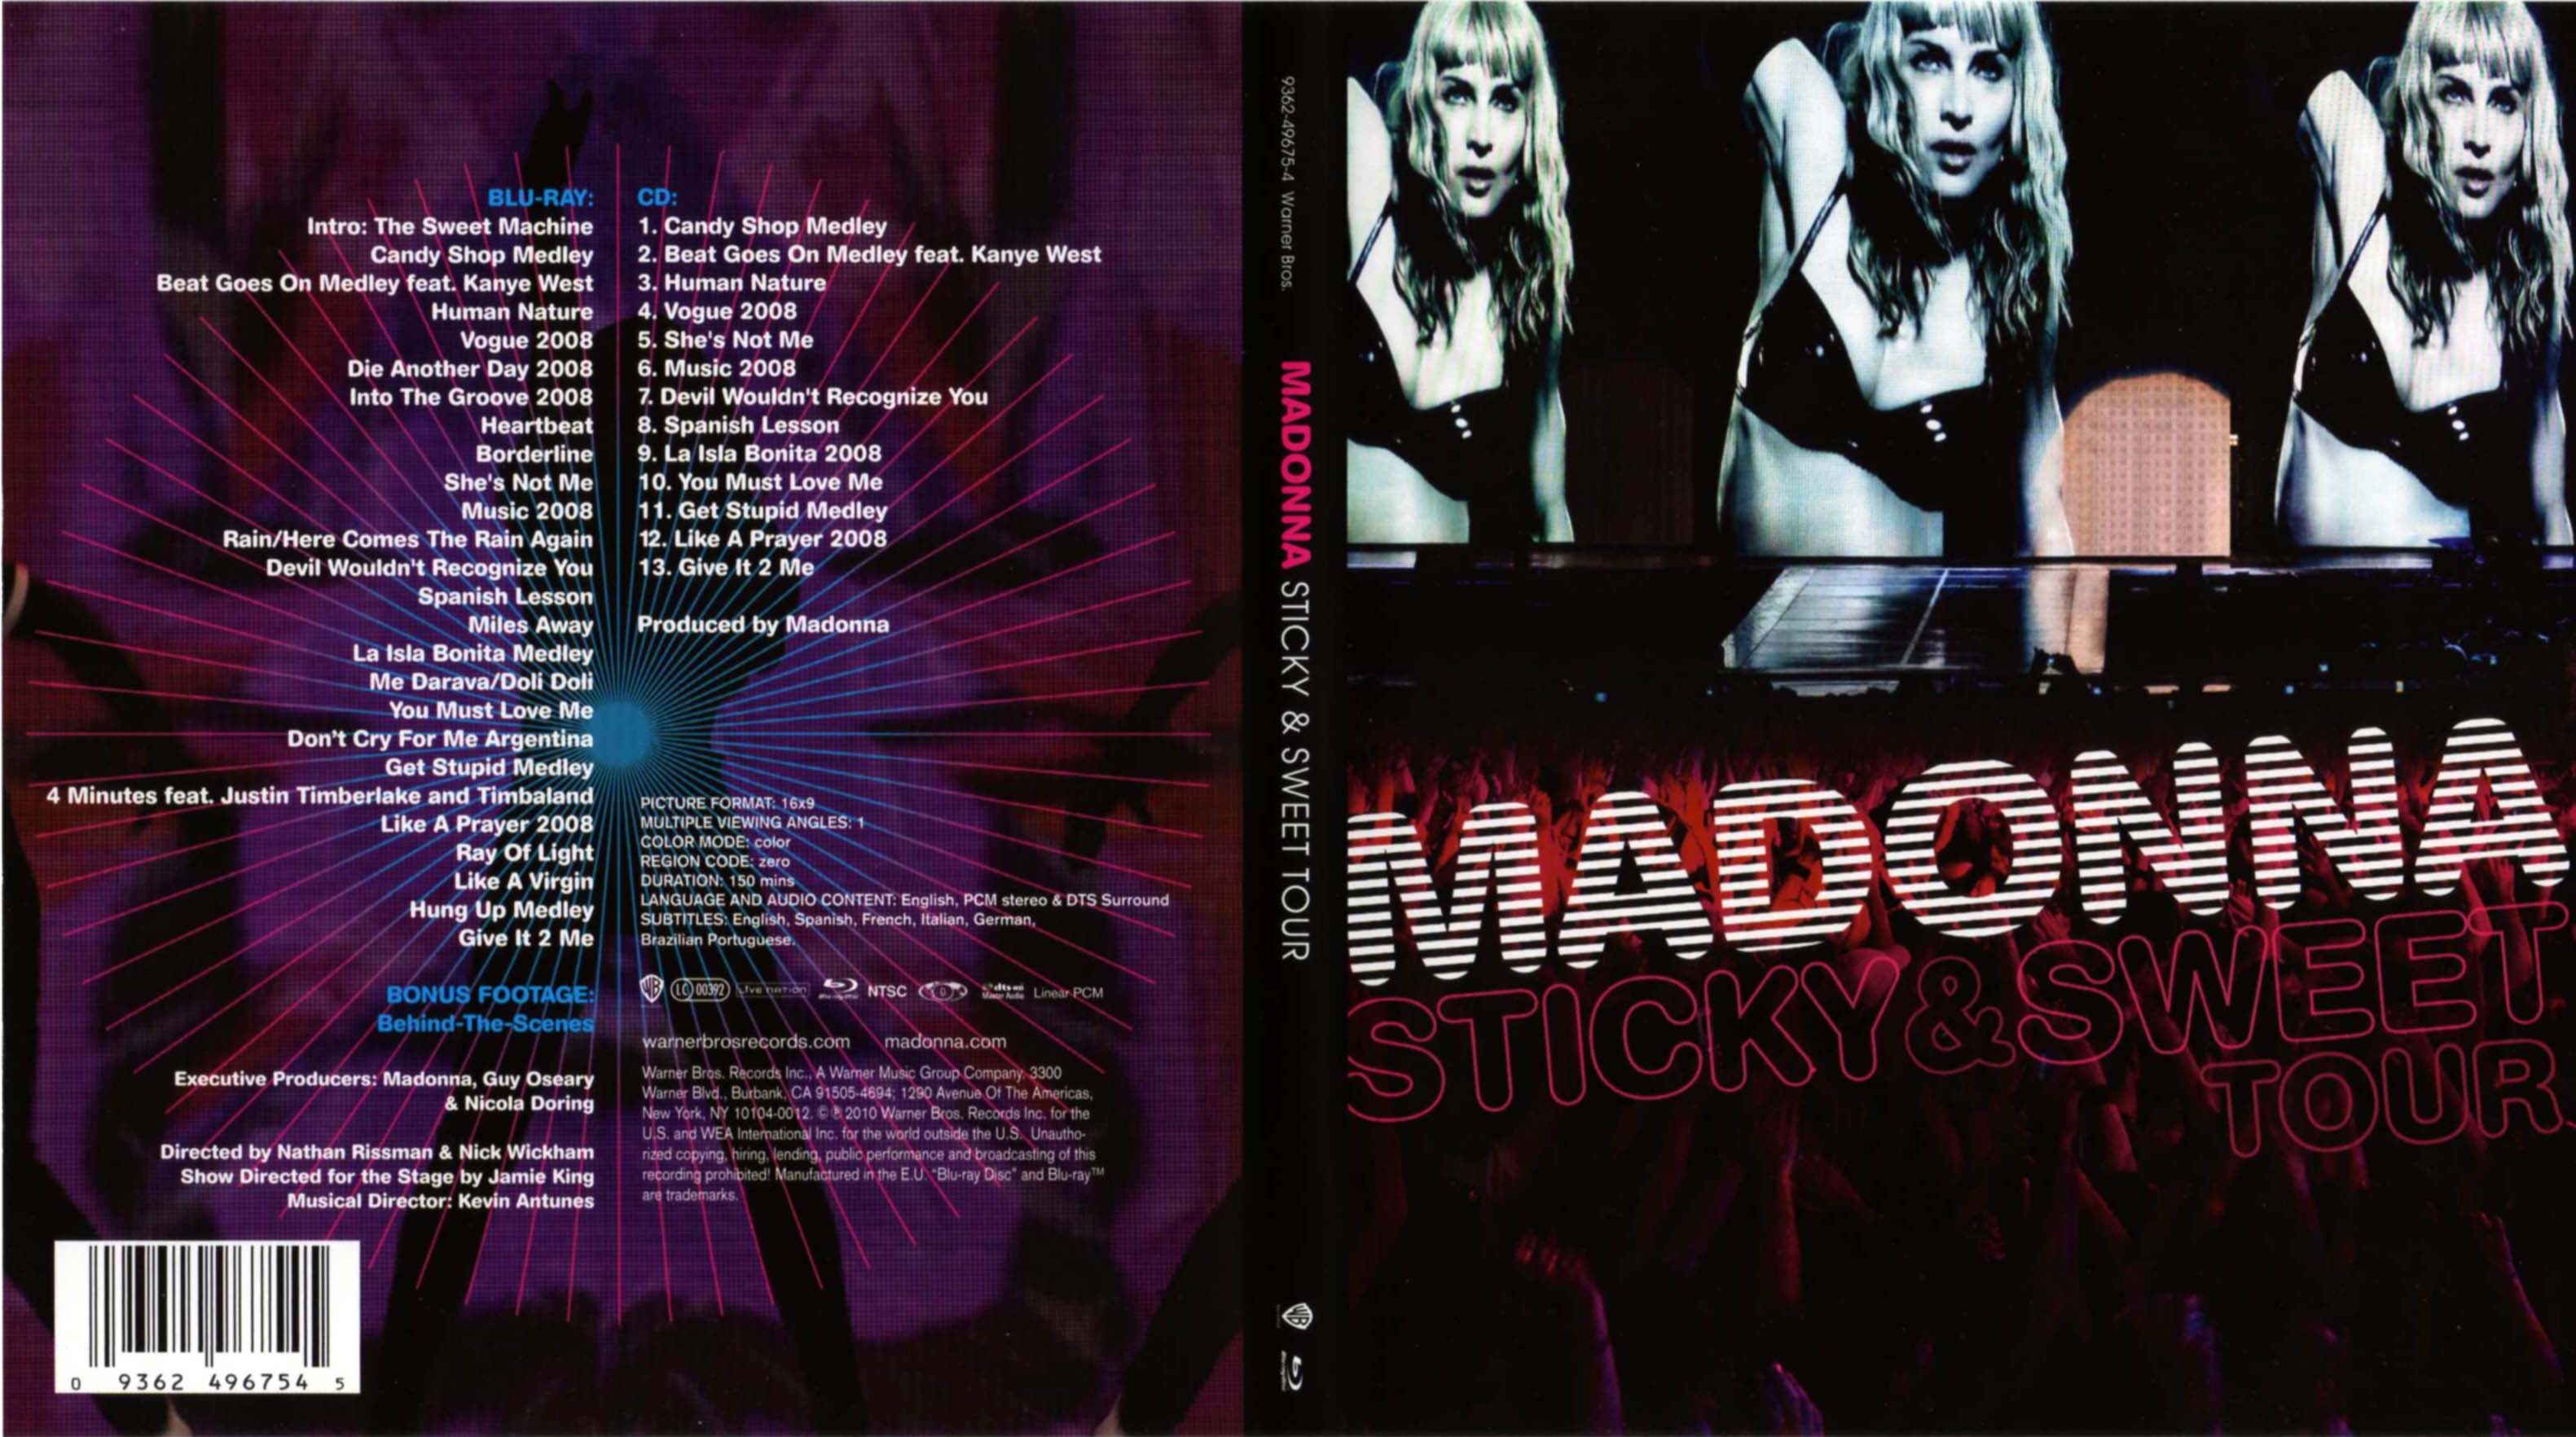 Jaquette DVD Madonna sticky and sweet tour (BLU-RAY)